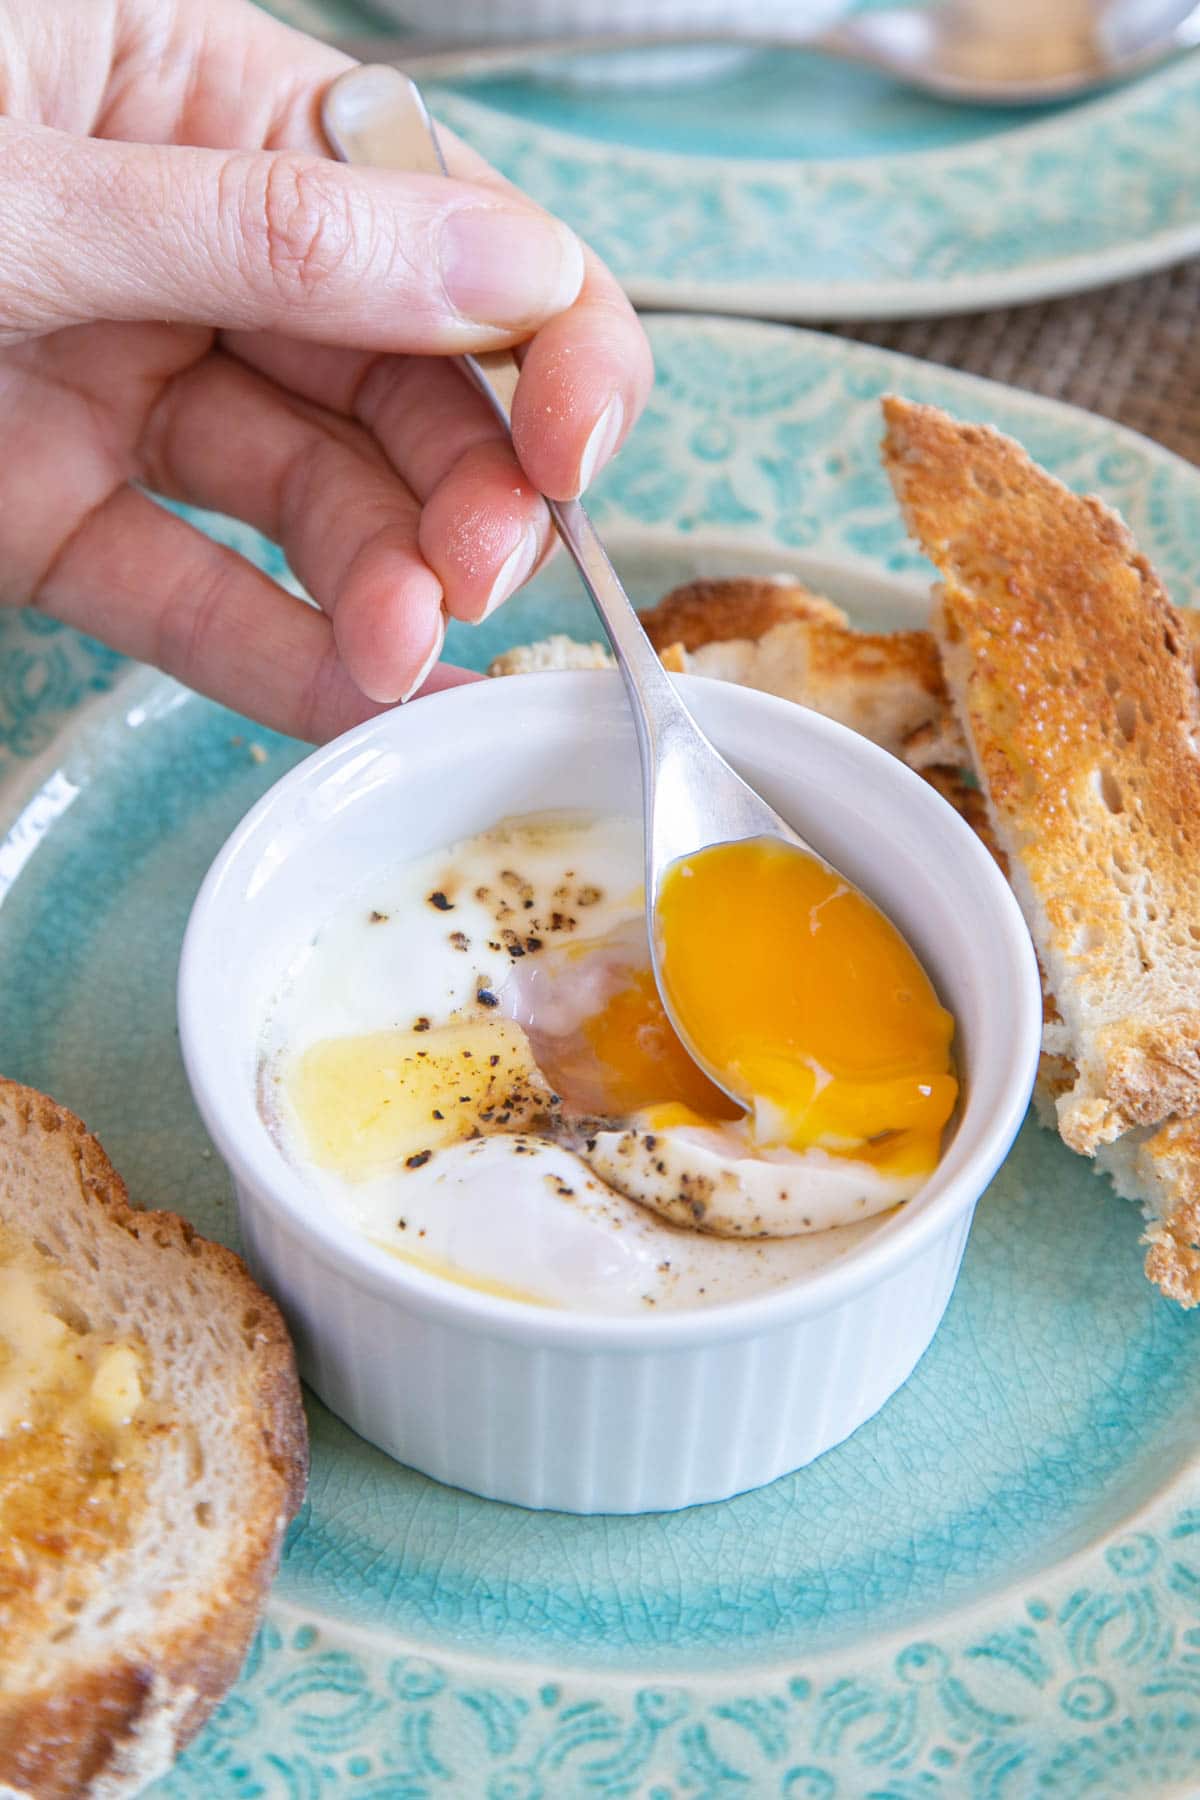 Breaking into the soft golden yoke with an egg spoon. These coddled eggs are delicious served with buttered toast.